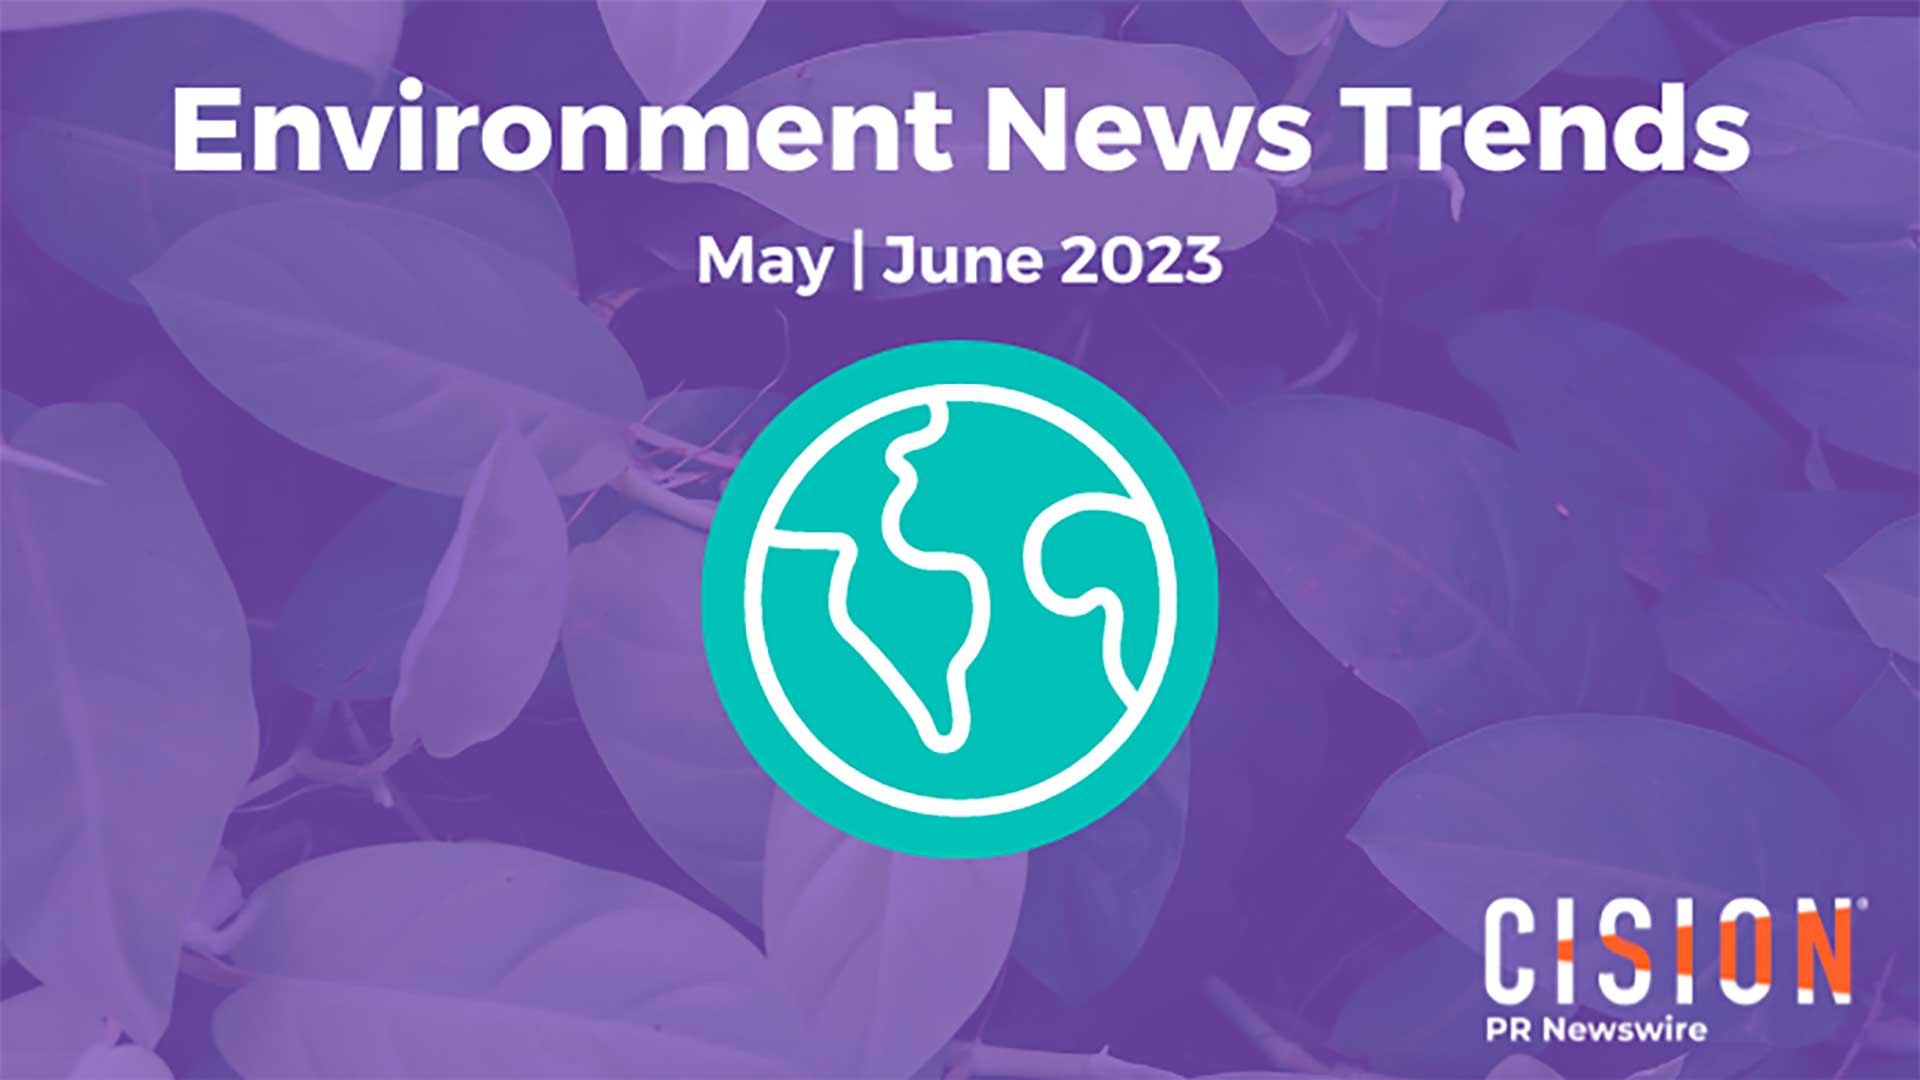 Extreme Weather, AI for Conservation, and More Environment News